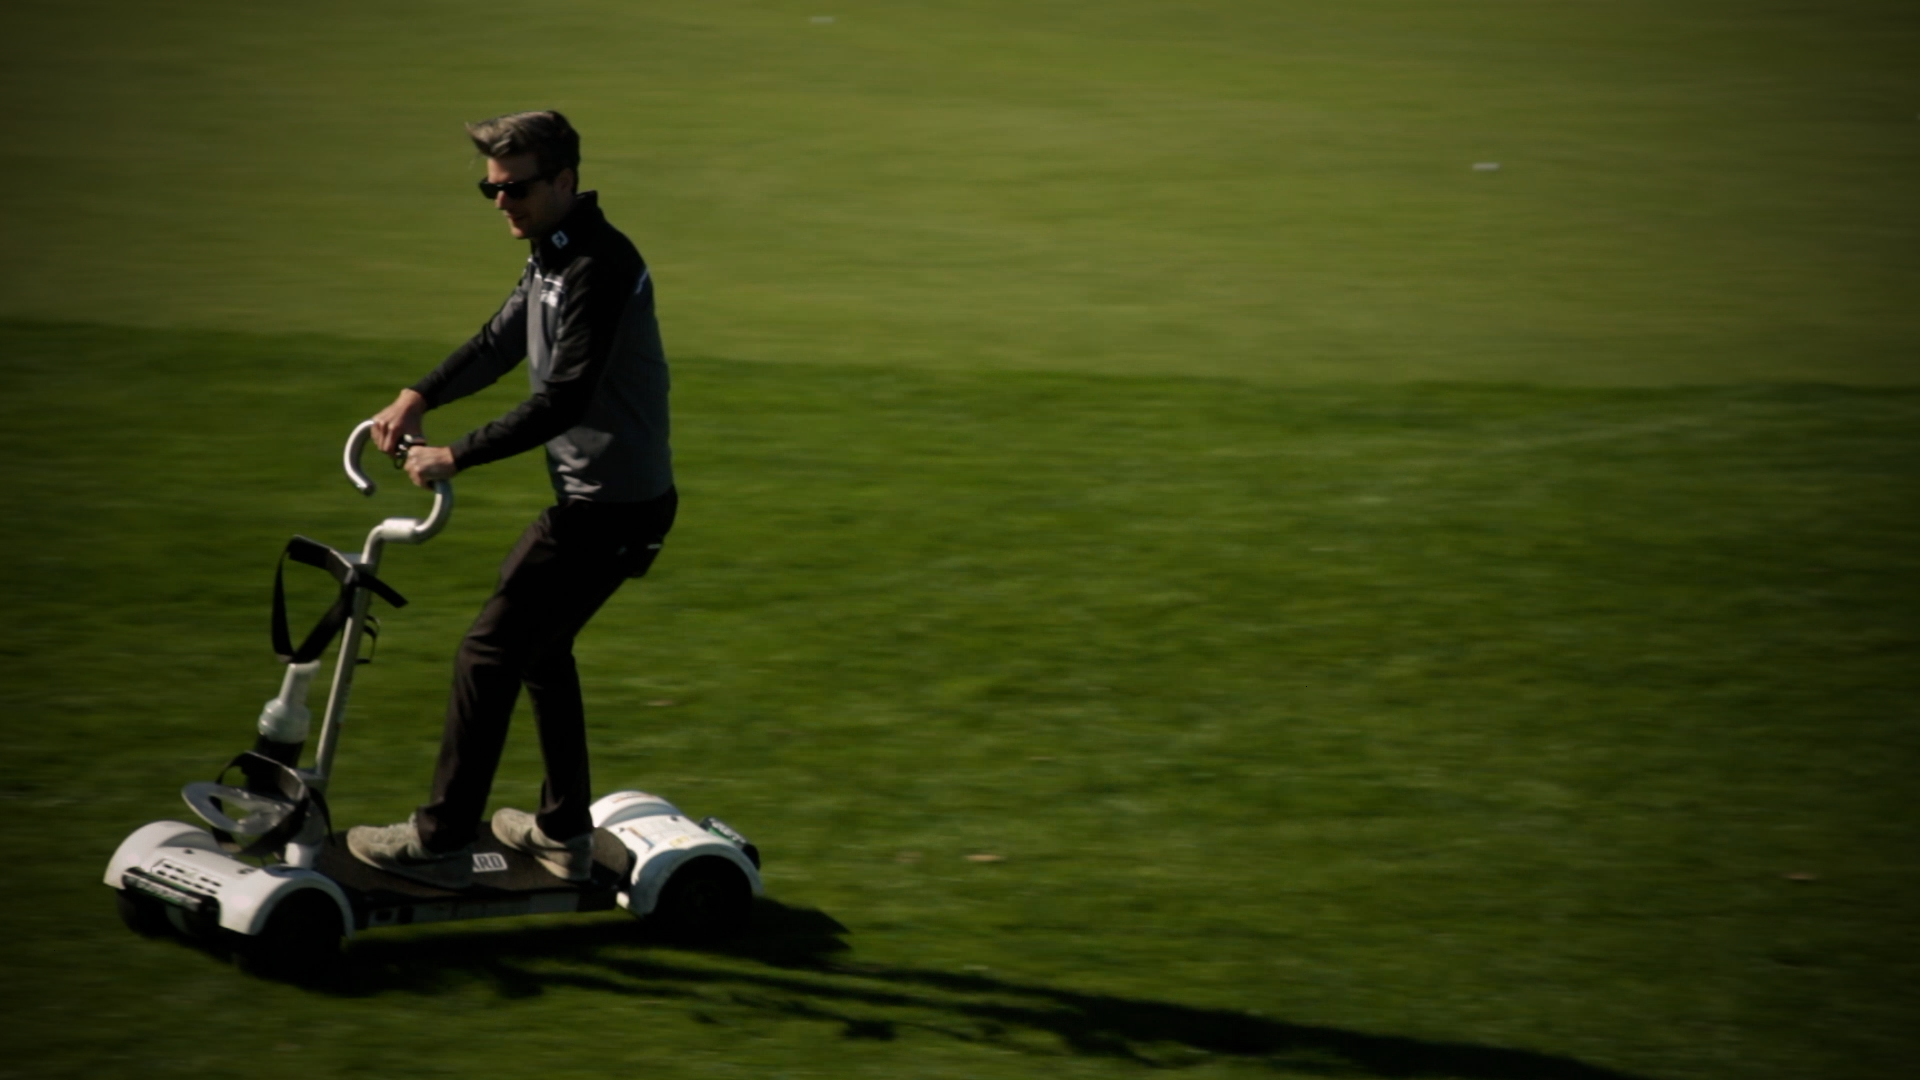 Golf Gadgets: Surf round the course on the GolfBoard